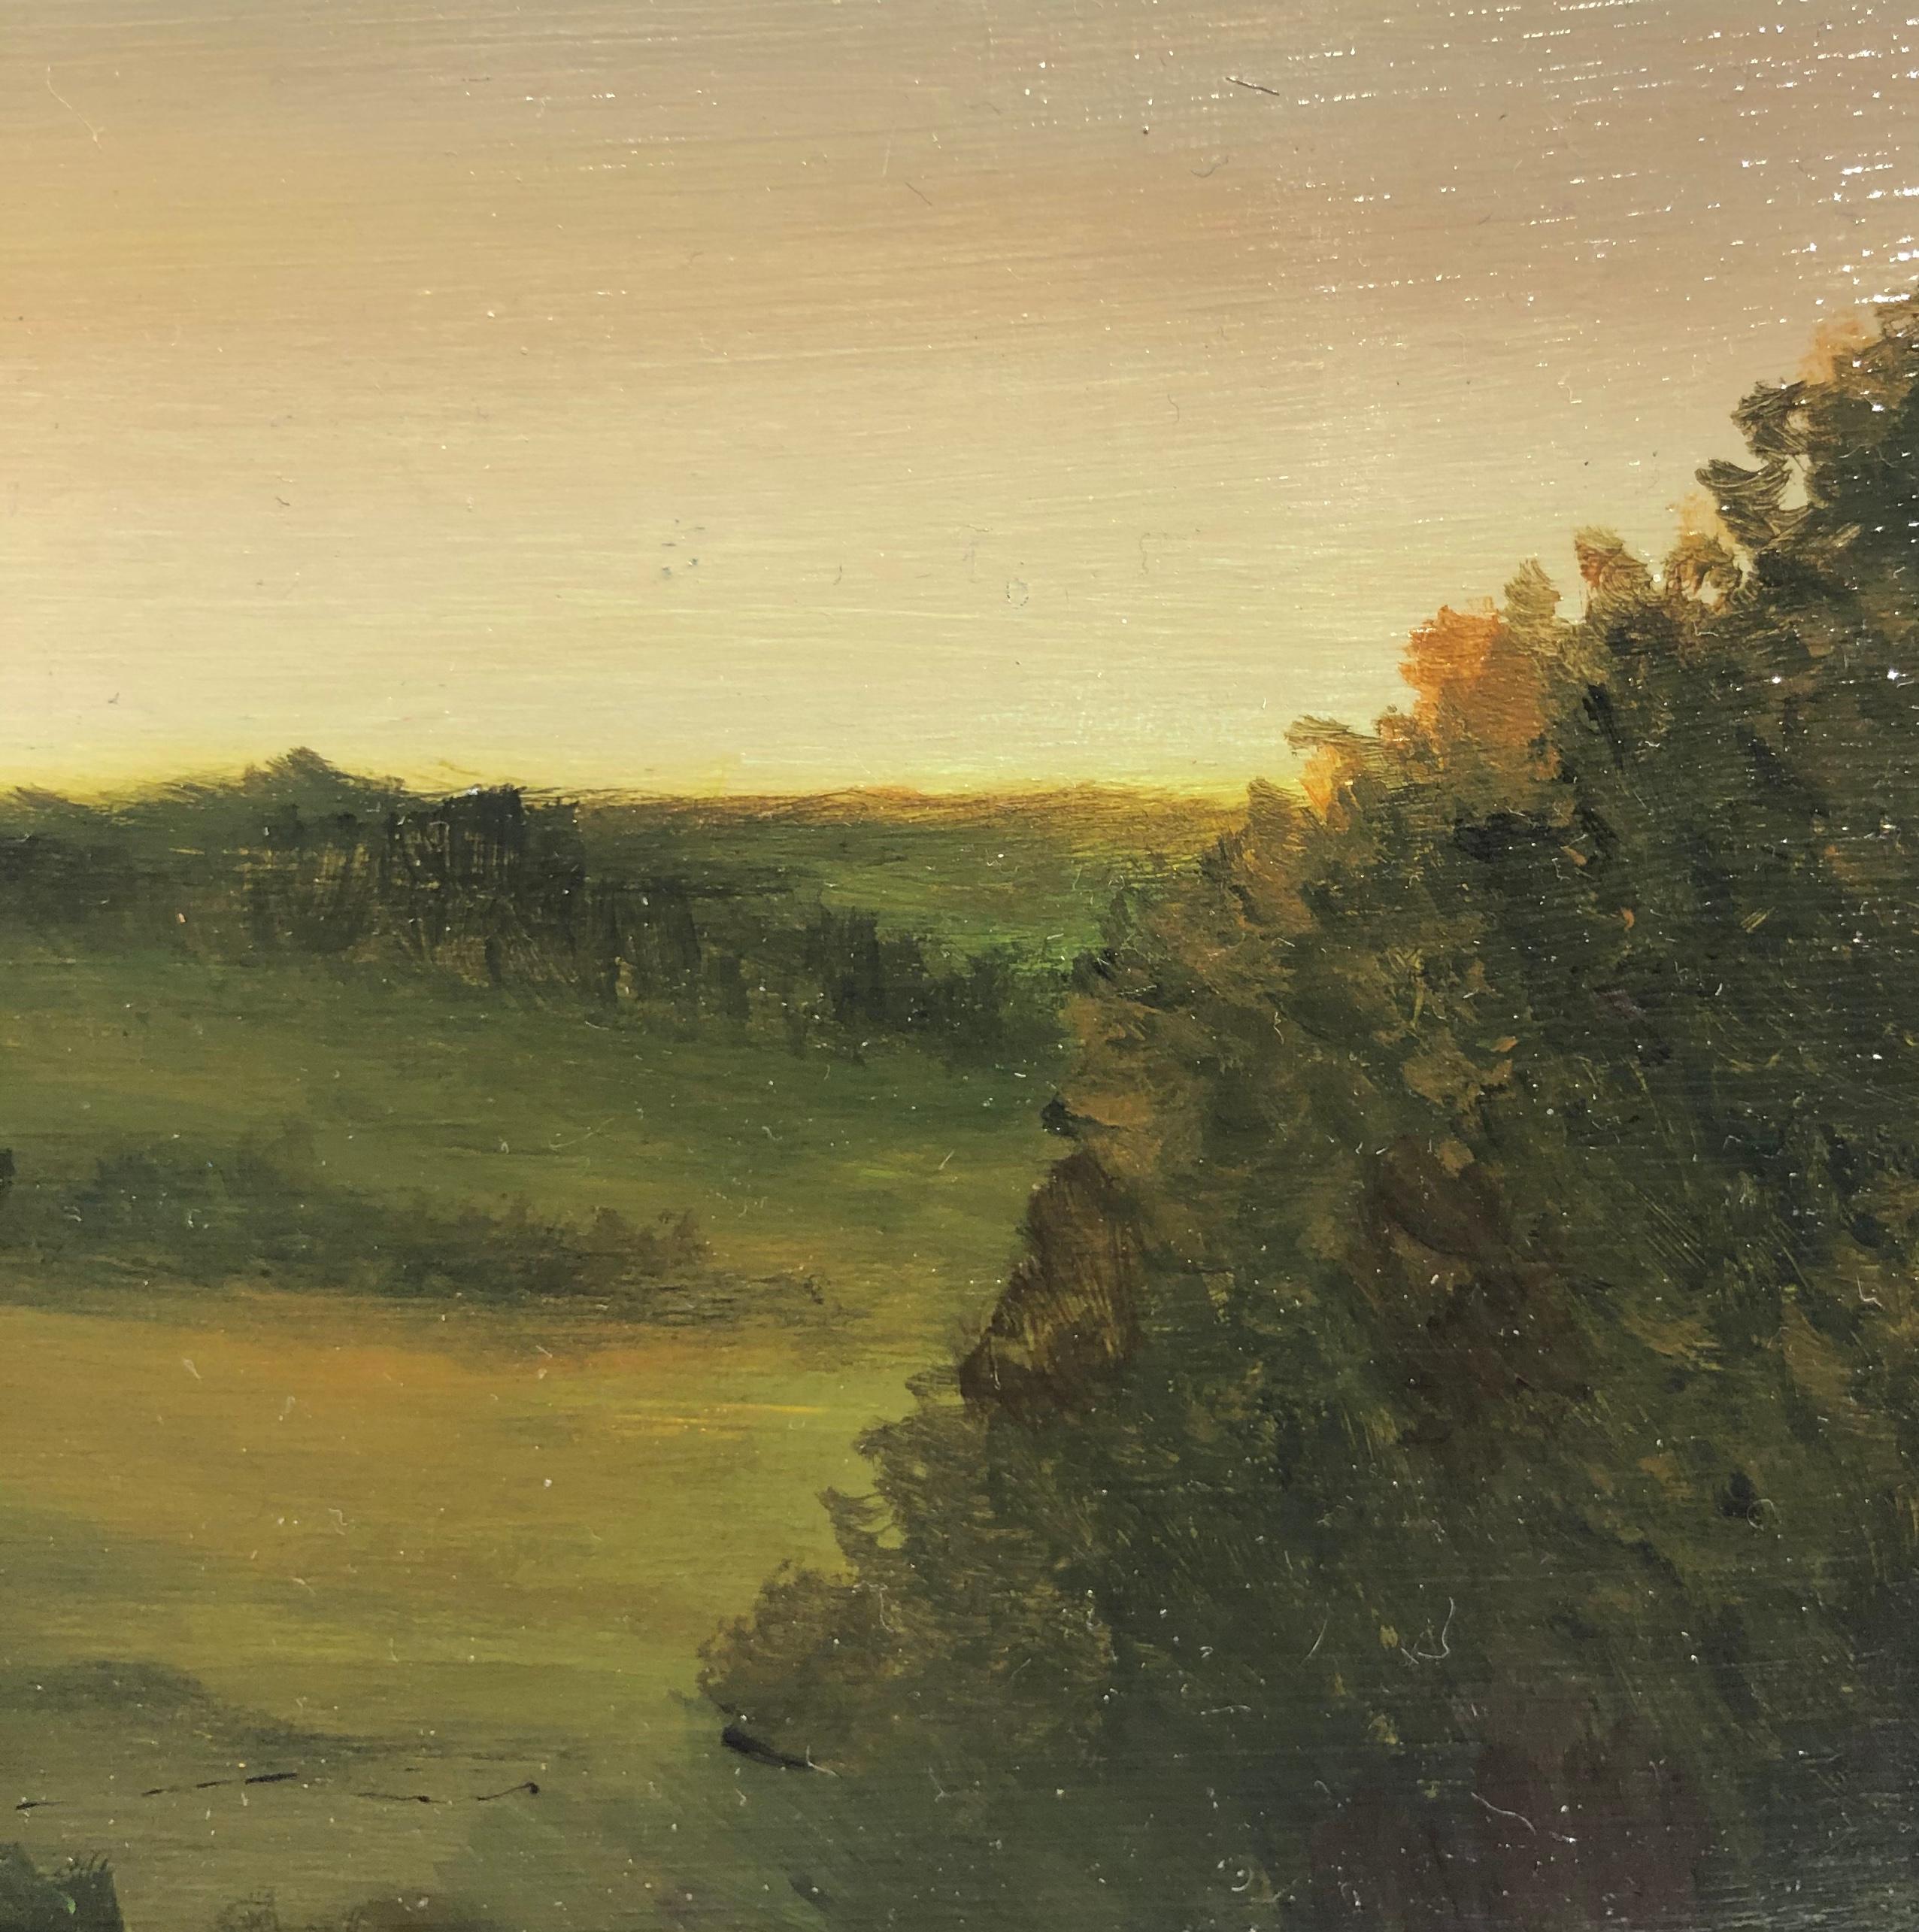 The sun peaks though the hazy clouds in this serene Midwestern landscape as only Ahzad Bogosian can capture.  This tranquil landscape, devoid of any human interaction, captures the complexities and beauty of mother nature.  The painting is framed in